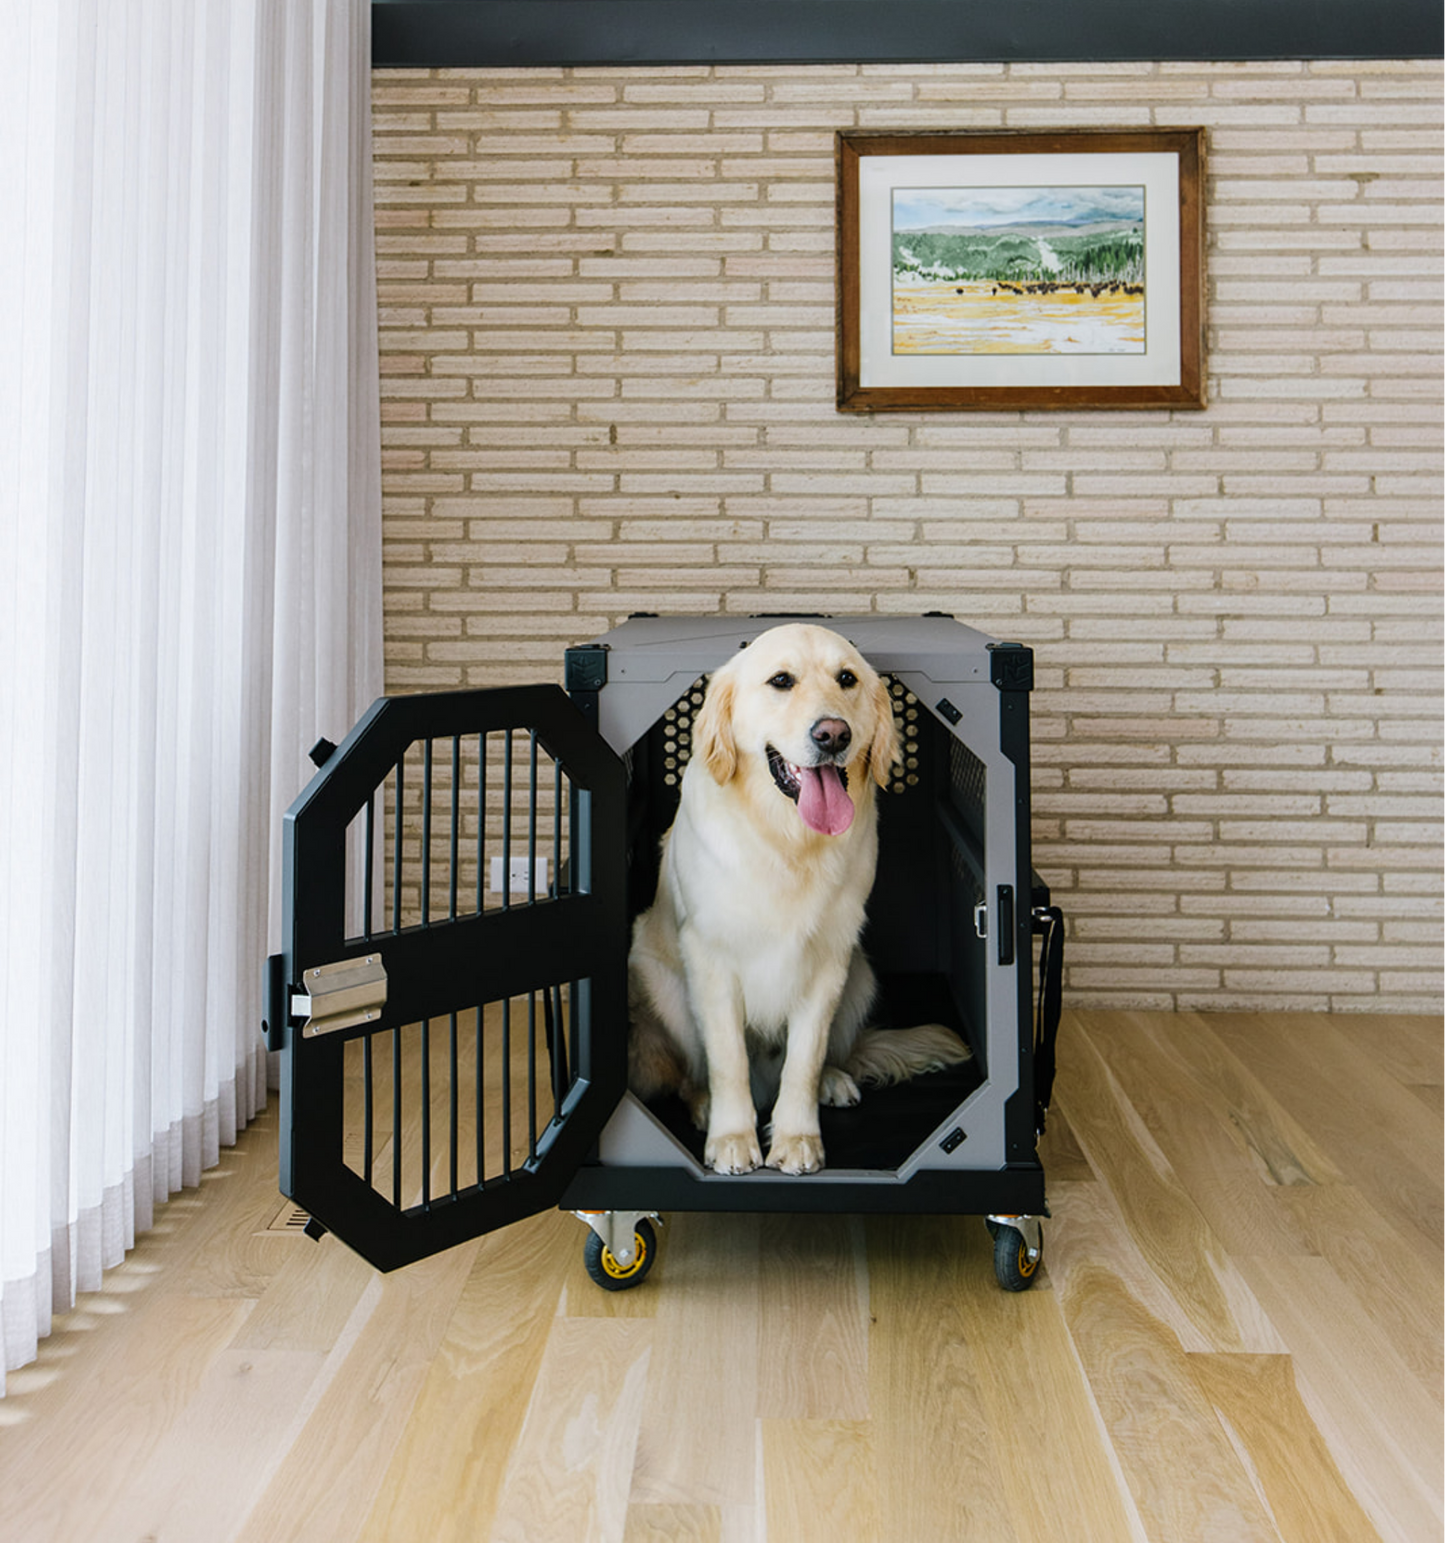 Stationary dog crate on wheel cart accessory by Rock Creek Crates